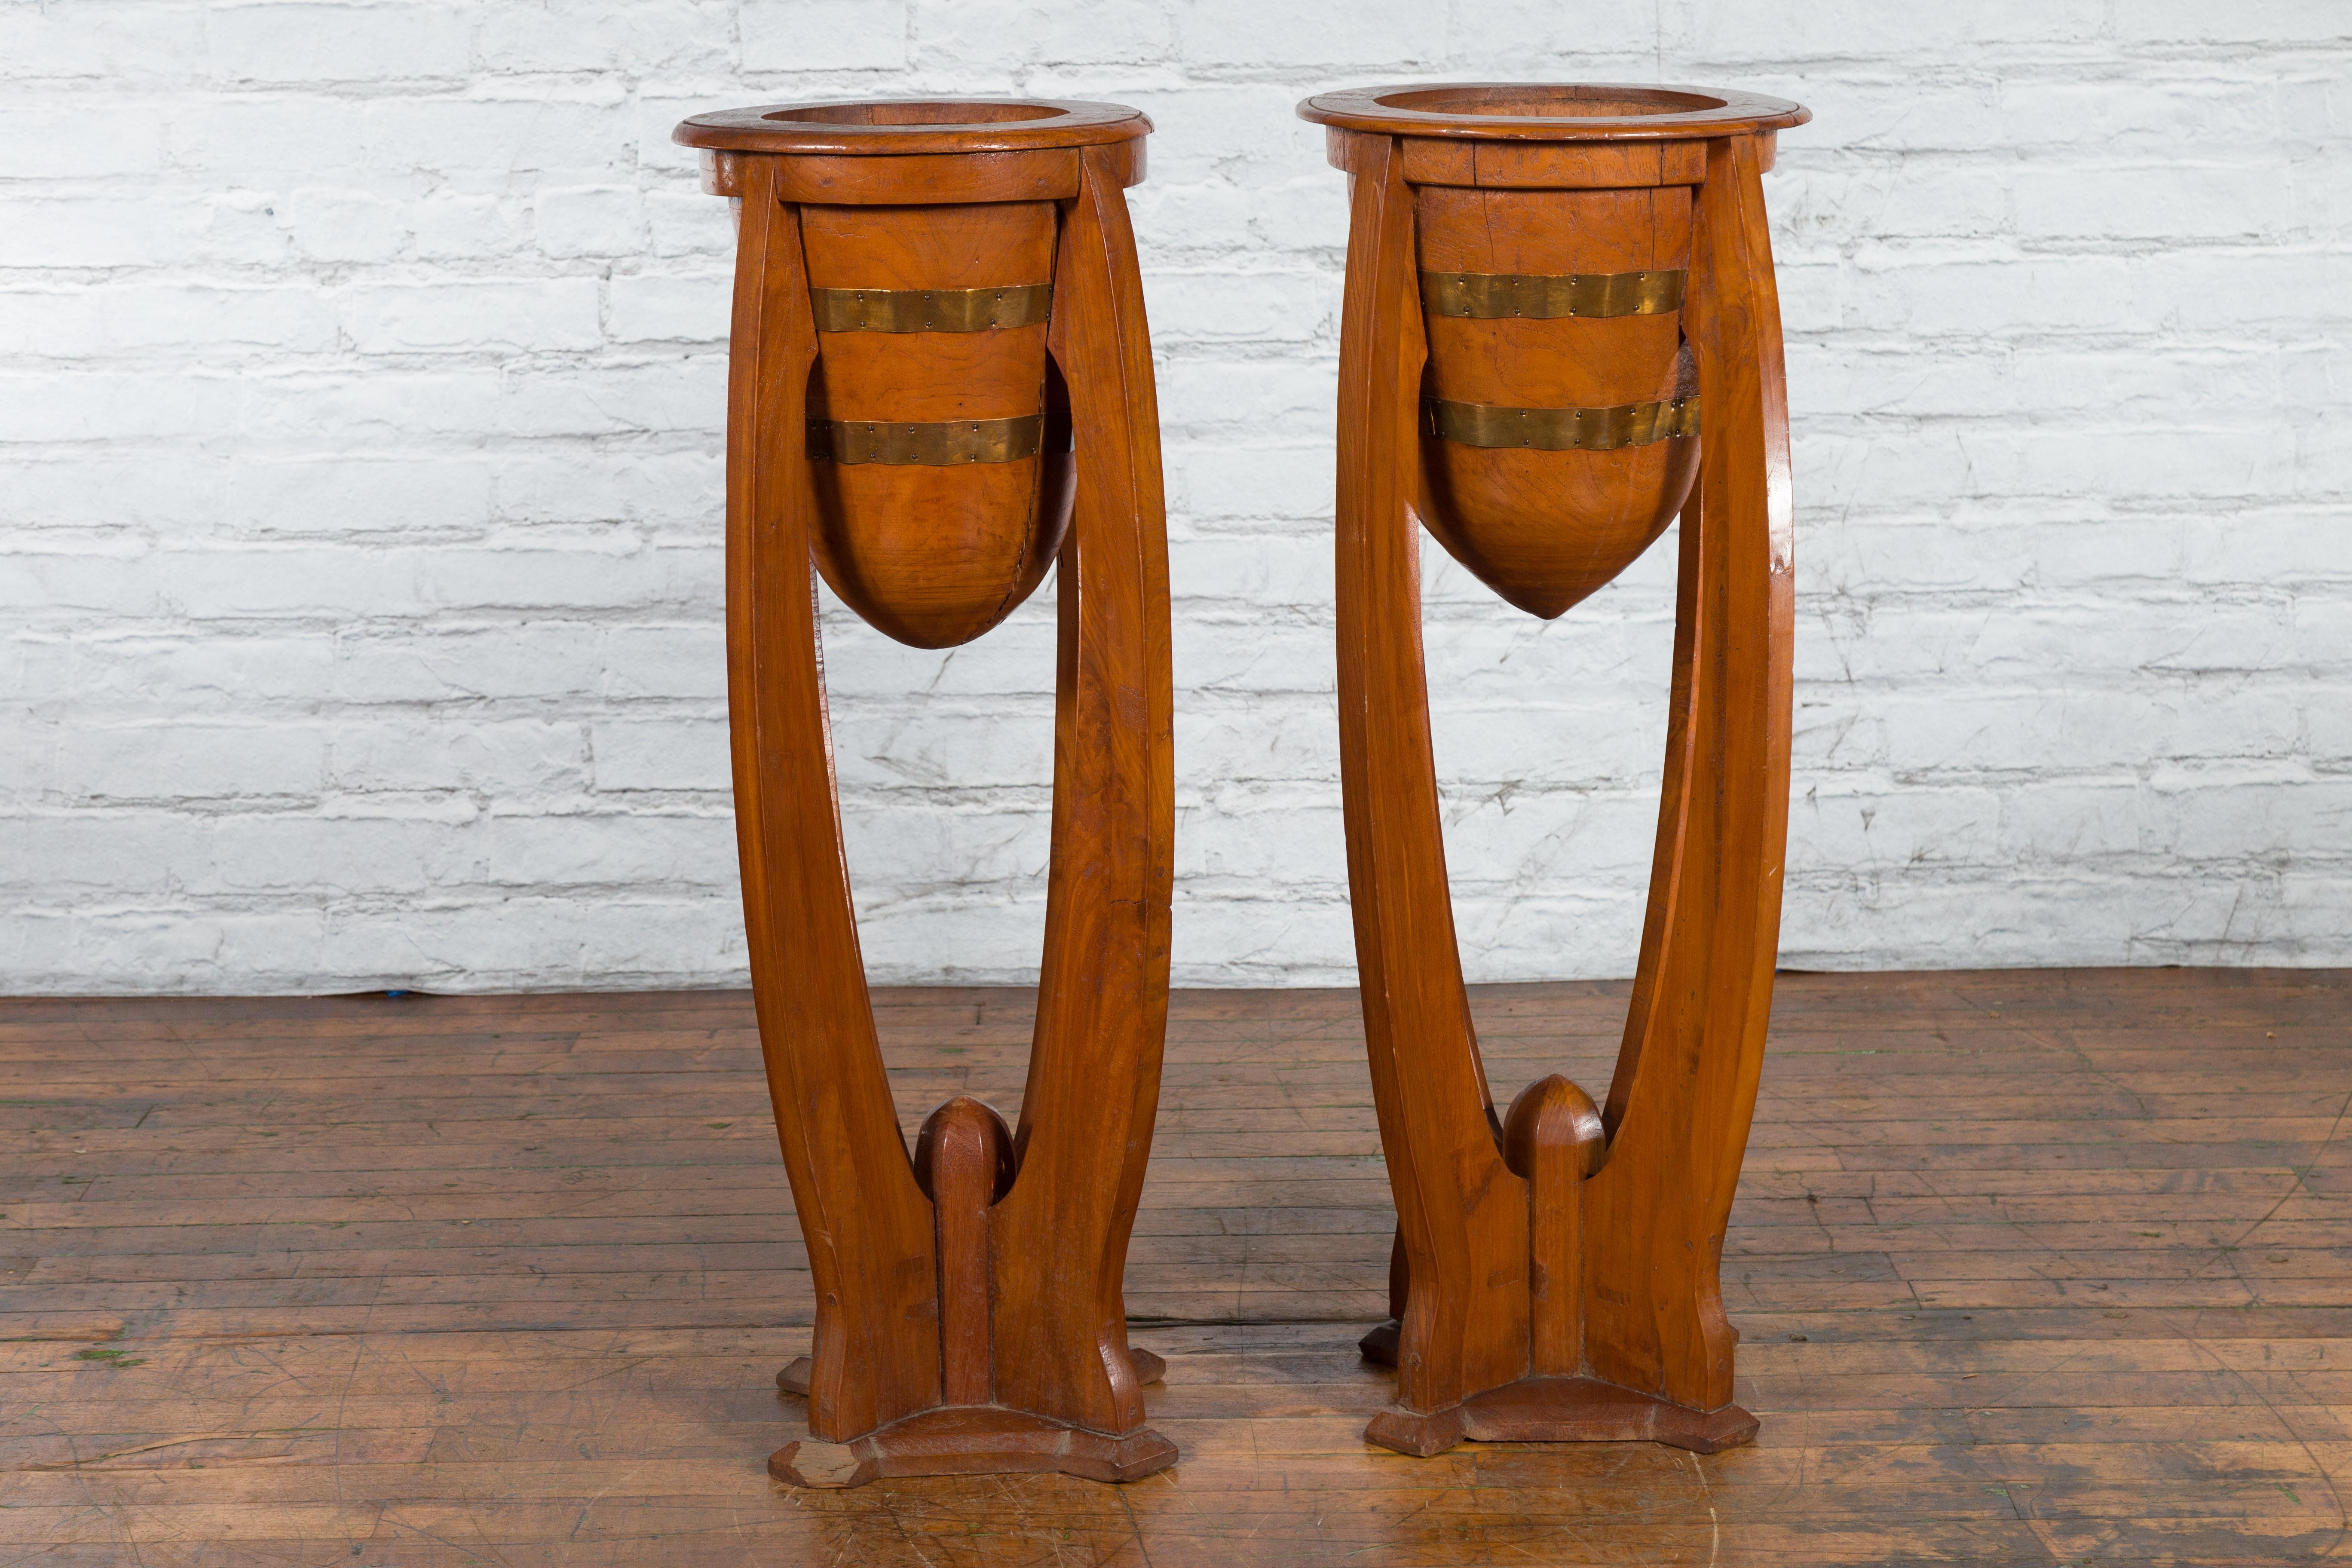 Large Pair of Javanese Art Deco Style Teak Wood Plant Stands with Brass Braces For Sale 7